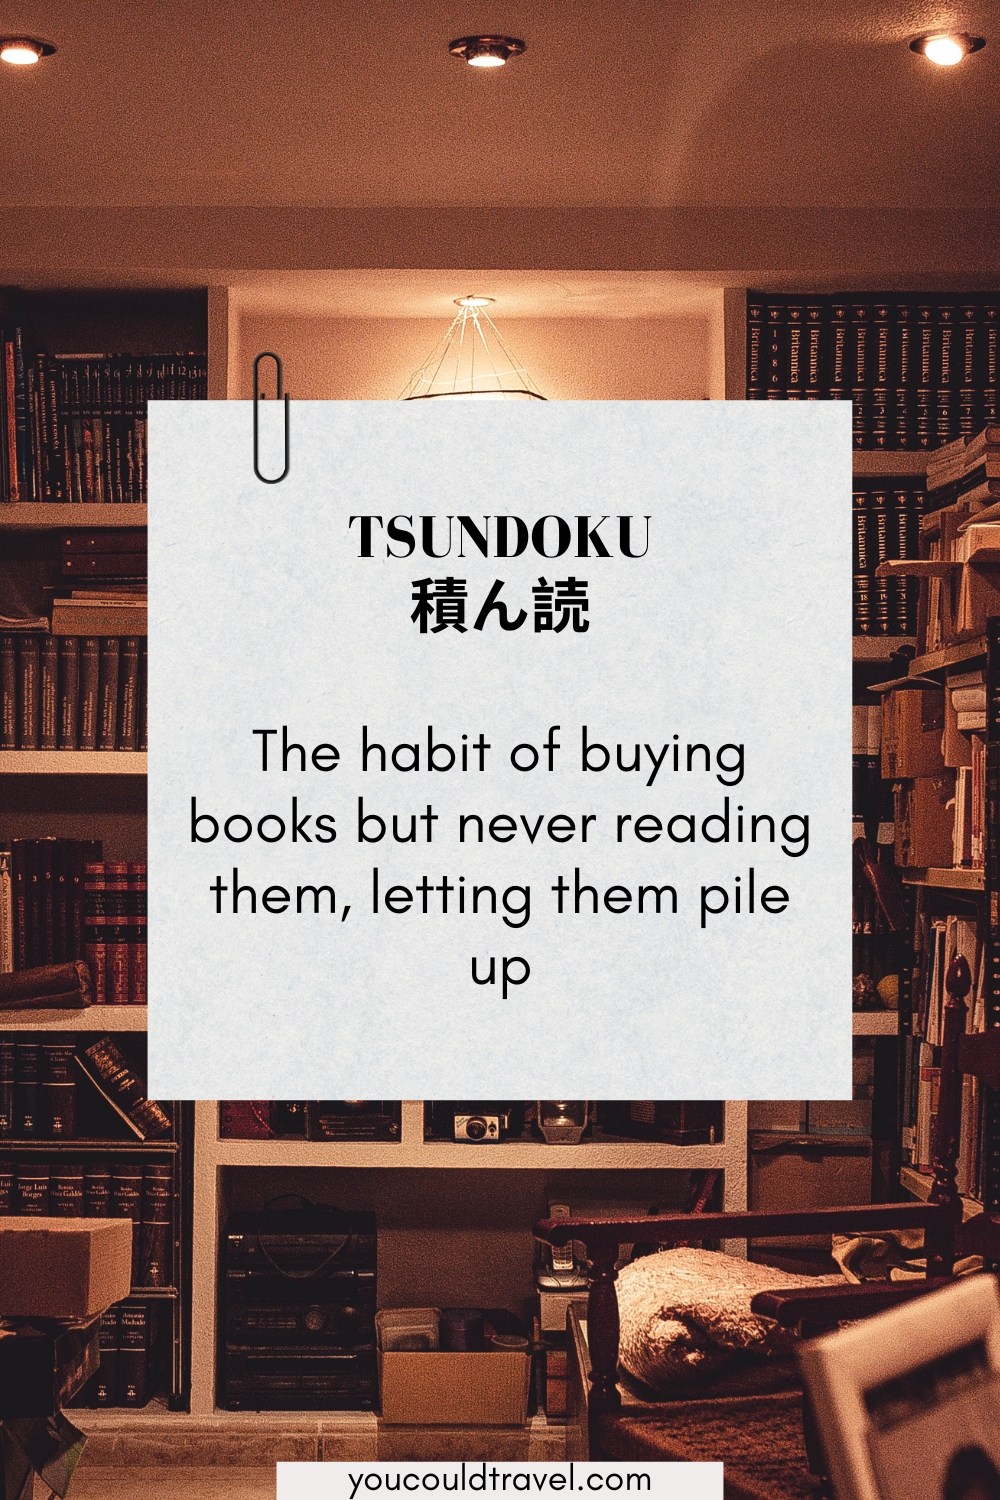 Tsundoku - Japanese word for the habit of buying books and never reading them